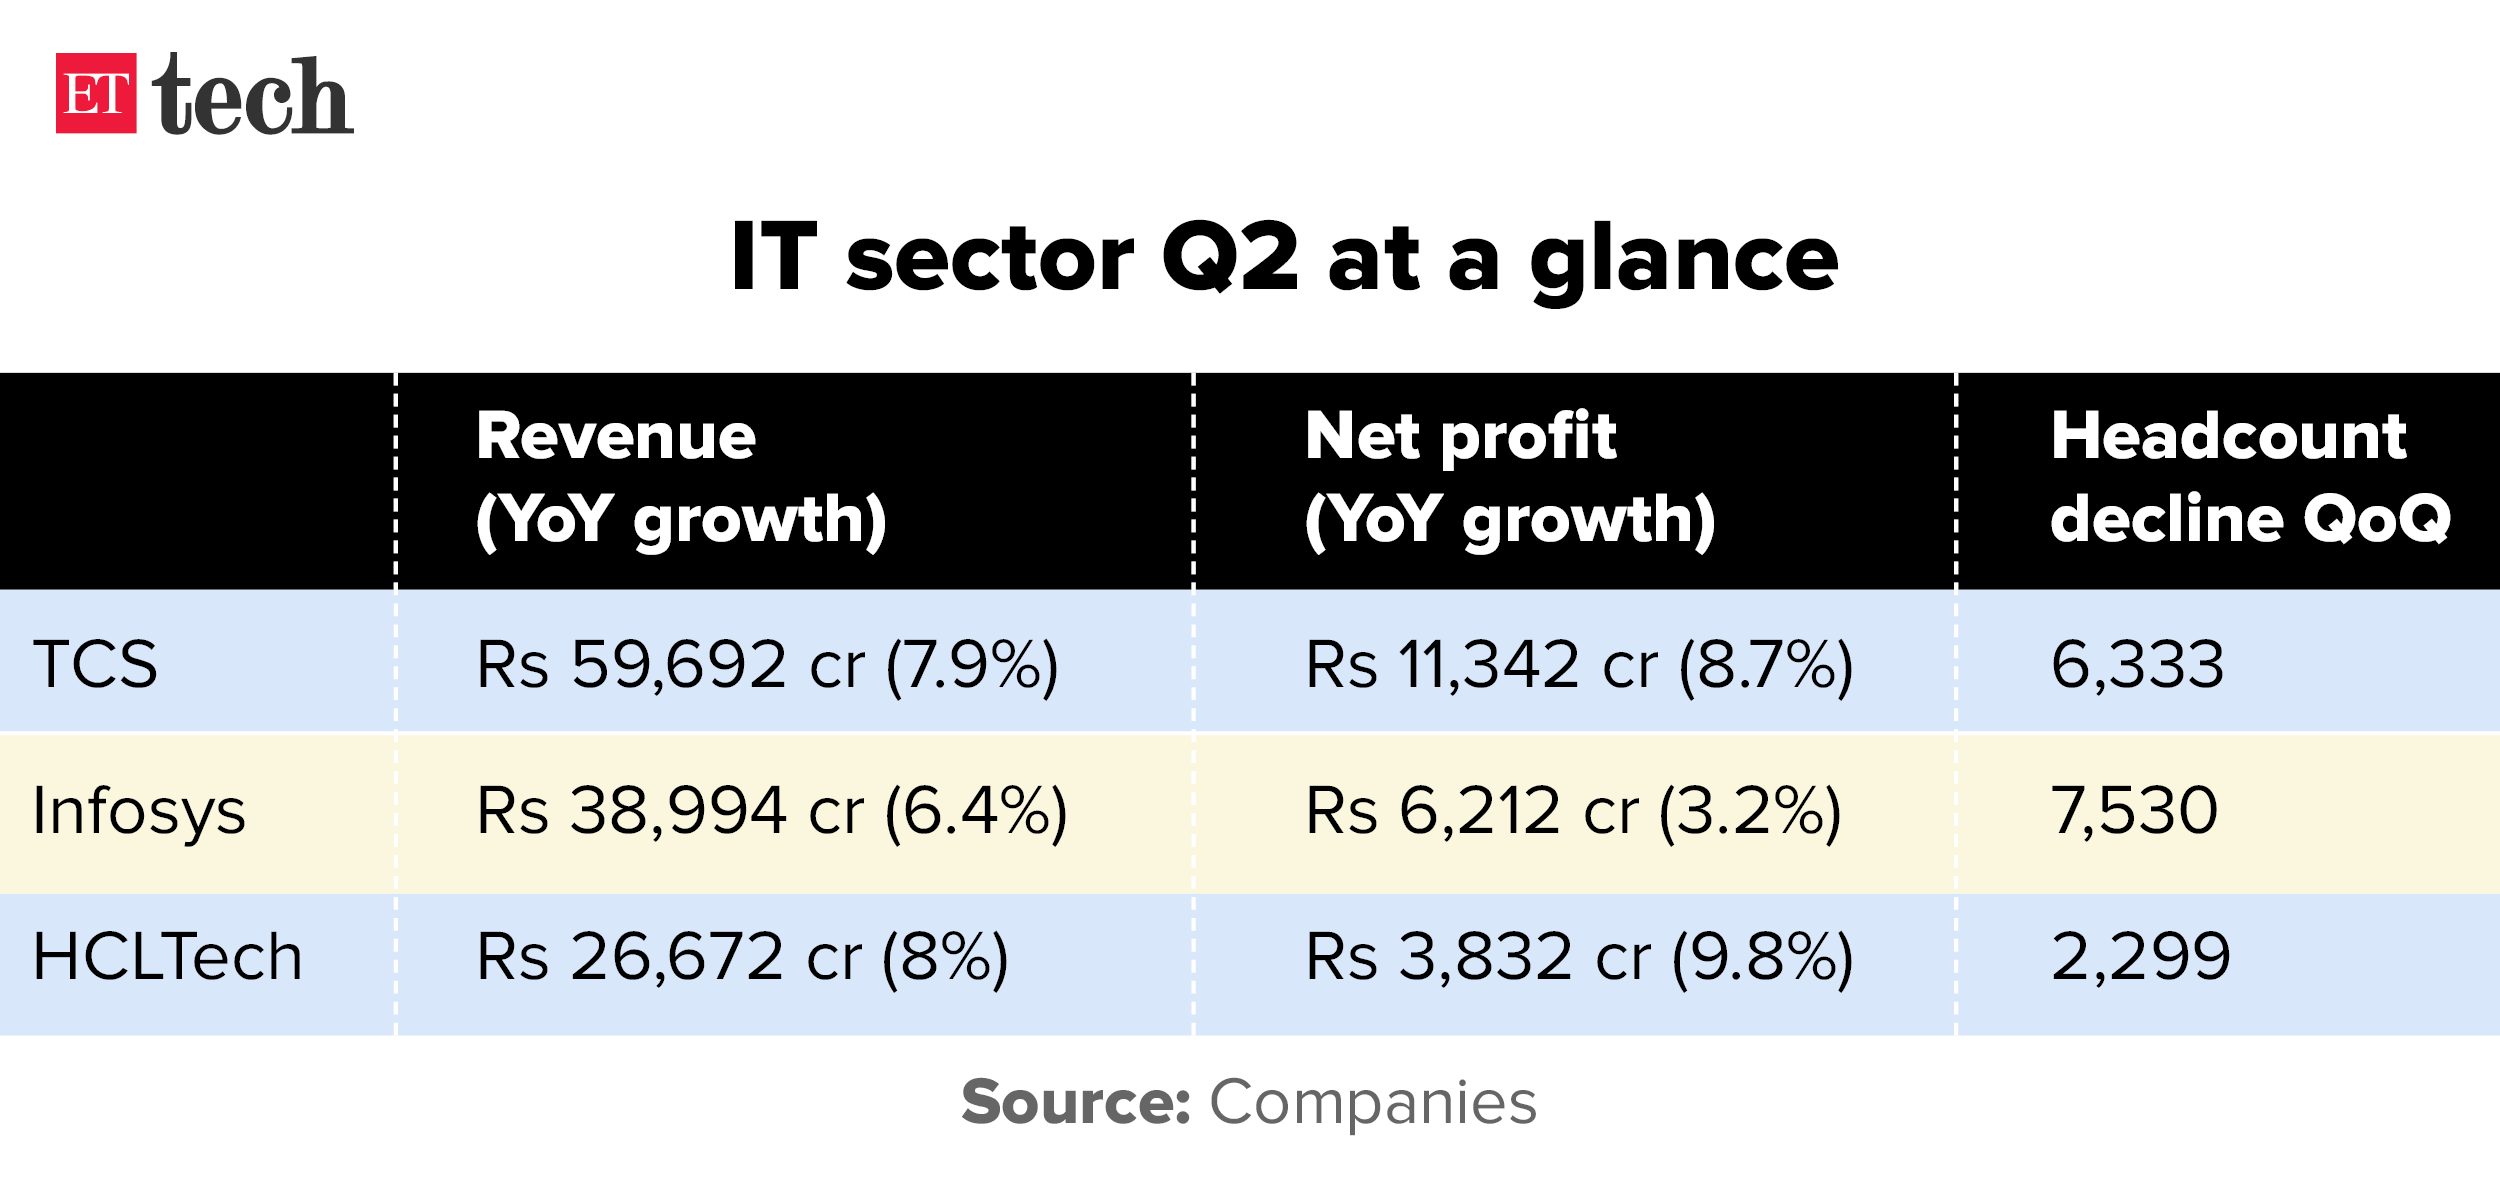 IT sector Q2 at a glance